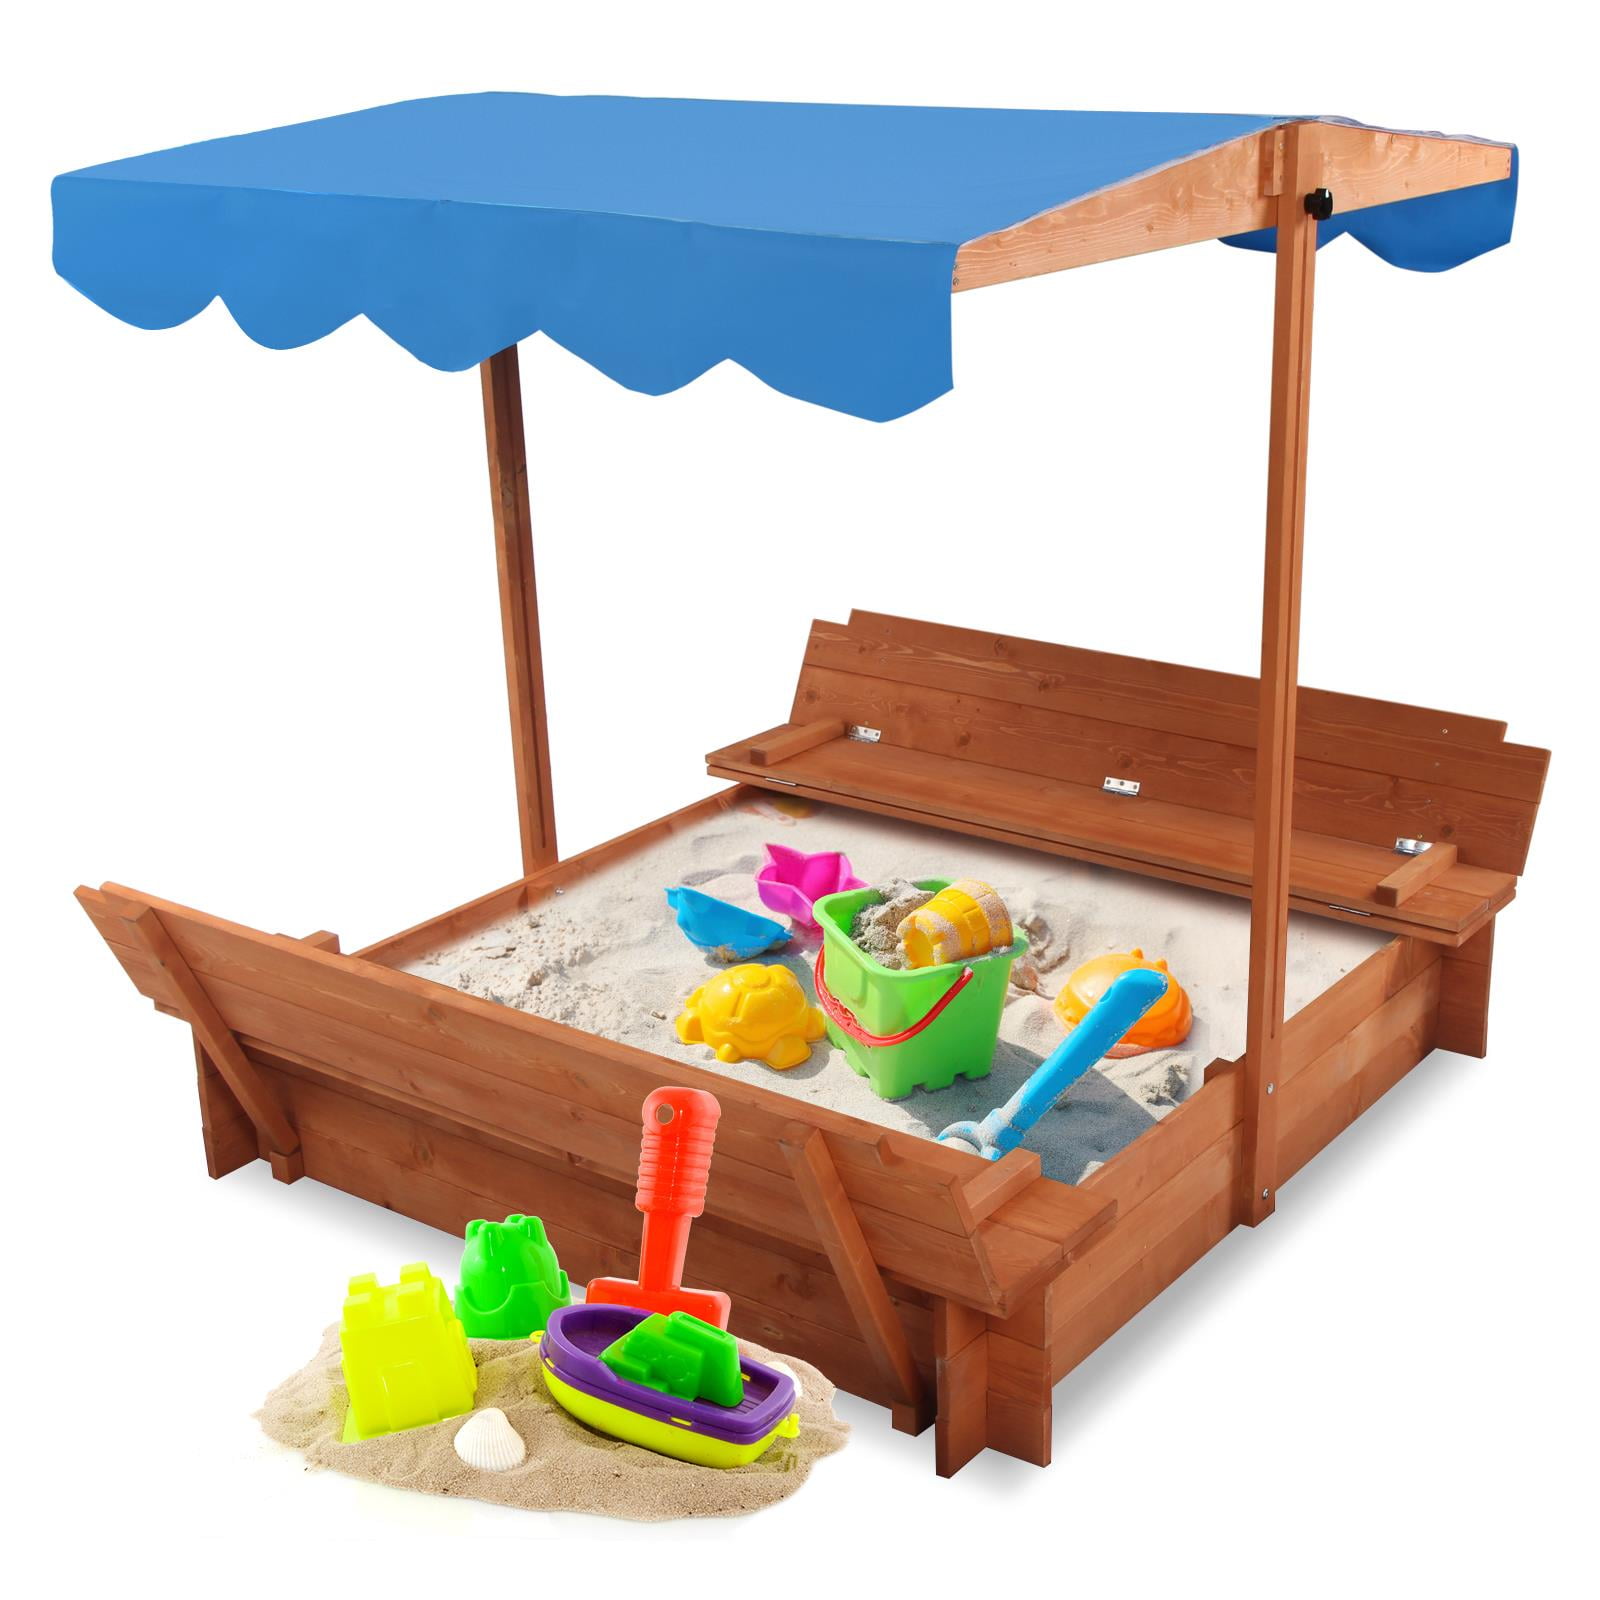 Details about   toy with drawstring Oxford cloth hexagonal dustproof and waterproof sandpit cove 